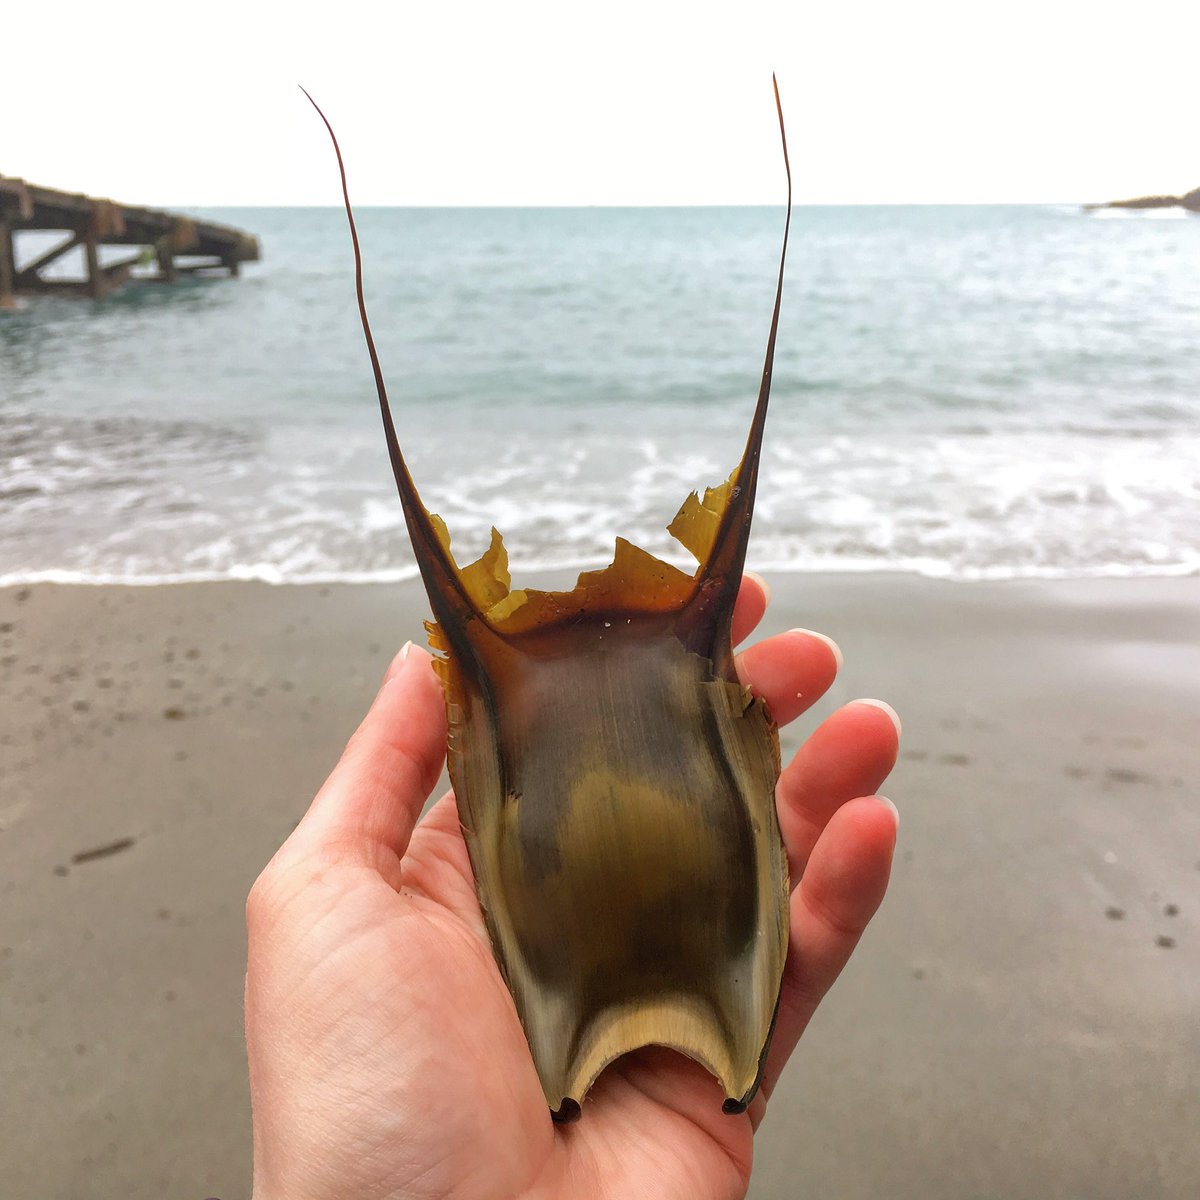 Happy Easter! 🐣 🌊 The eggcase of a small-eyed ray, found at Britain’s most southerly point a few years ago. Our seas are incredible.